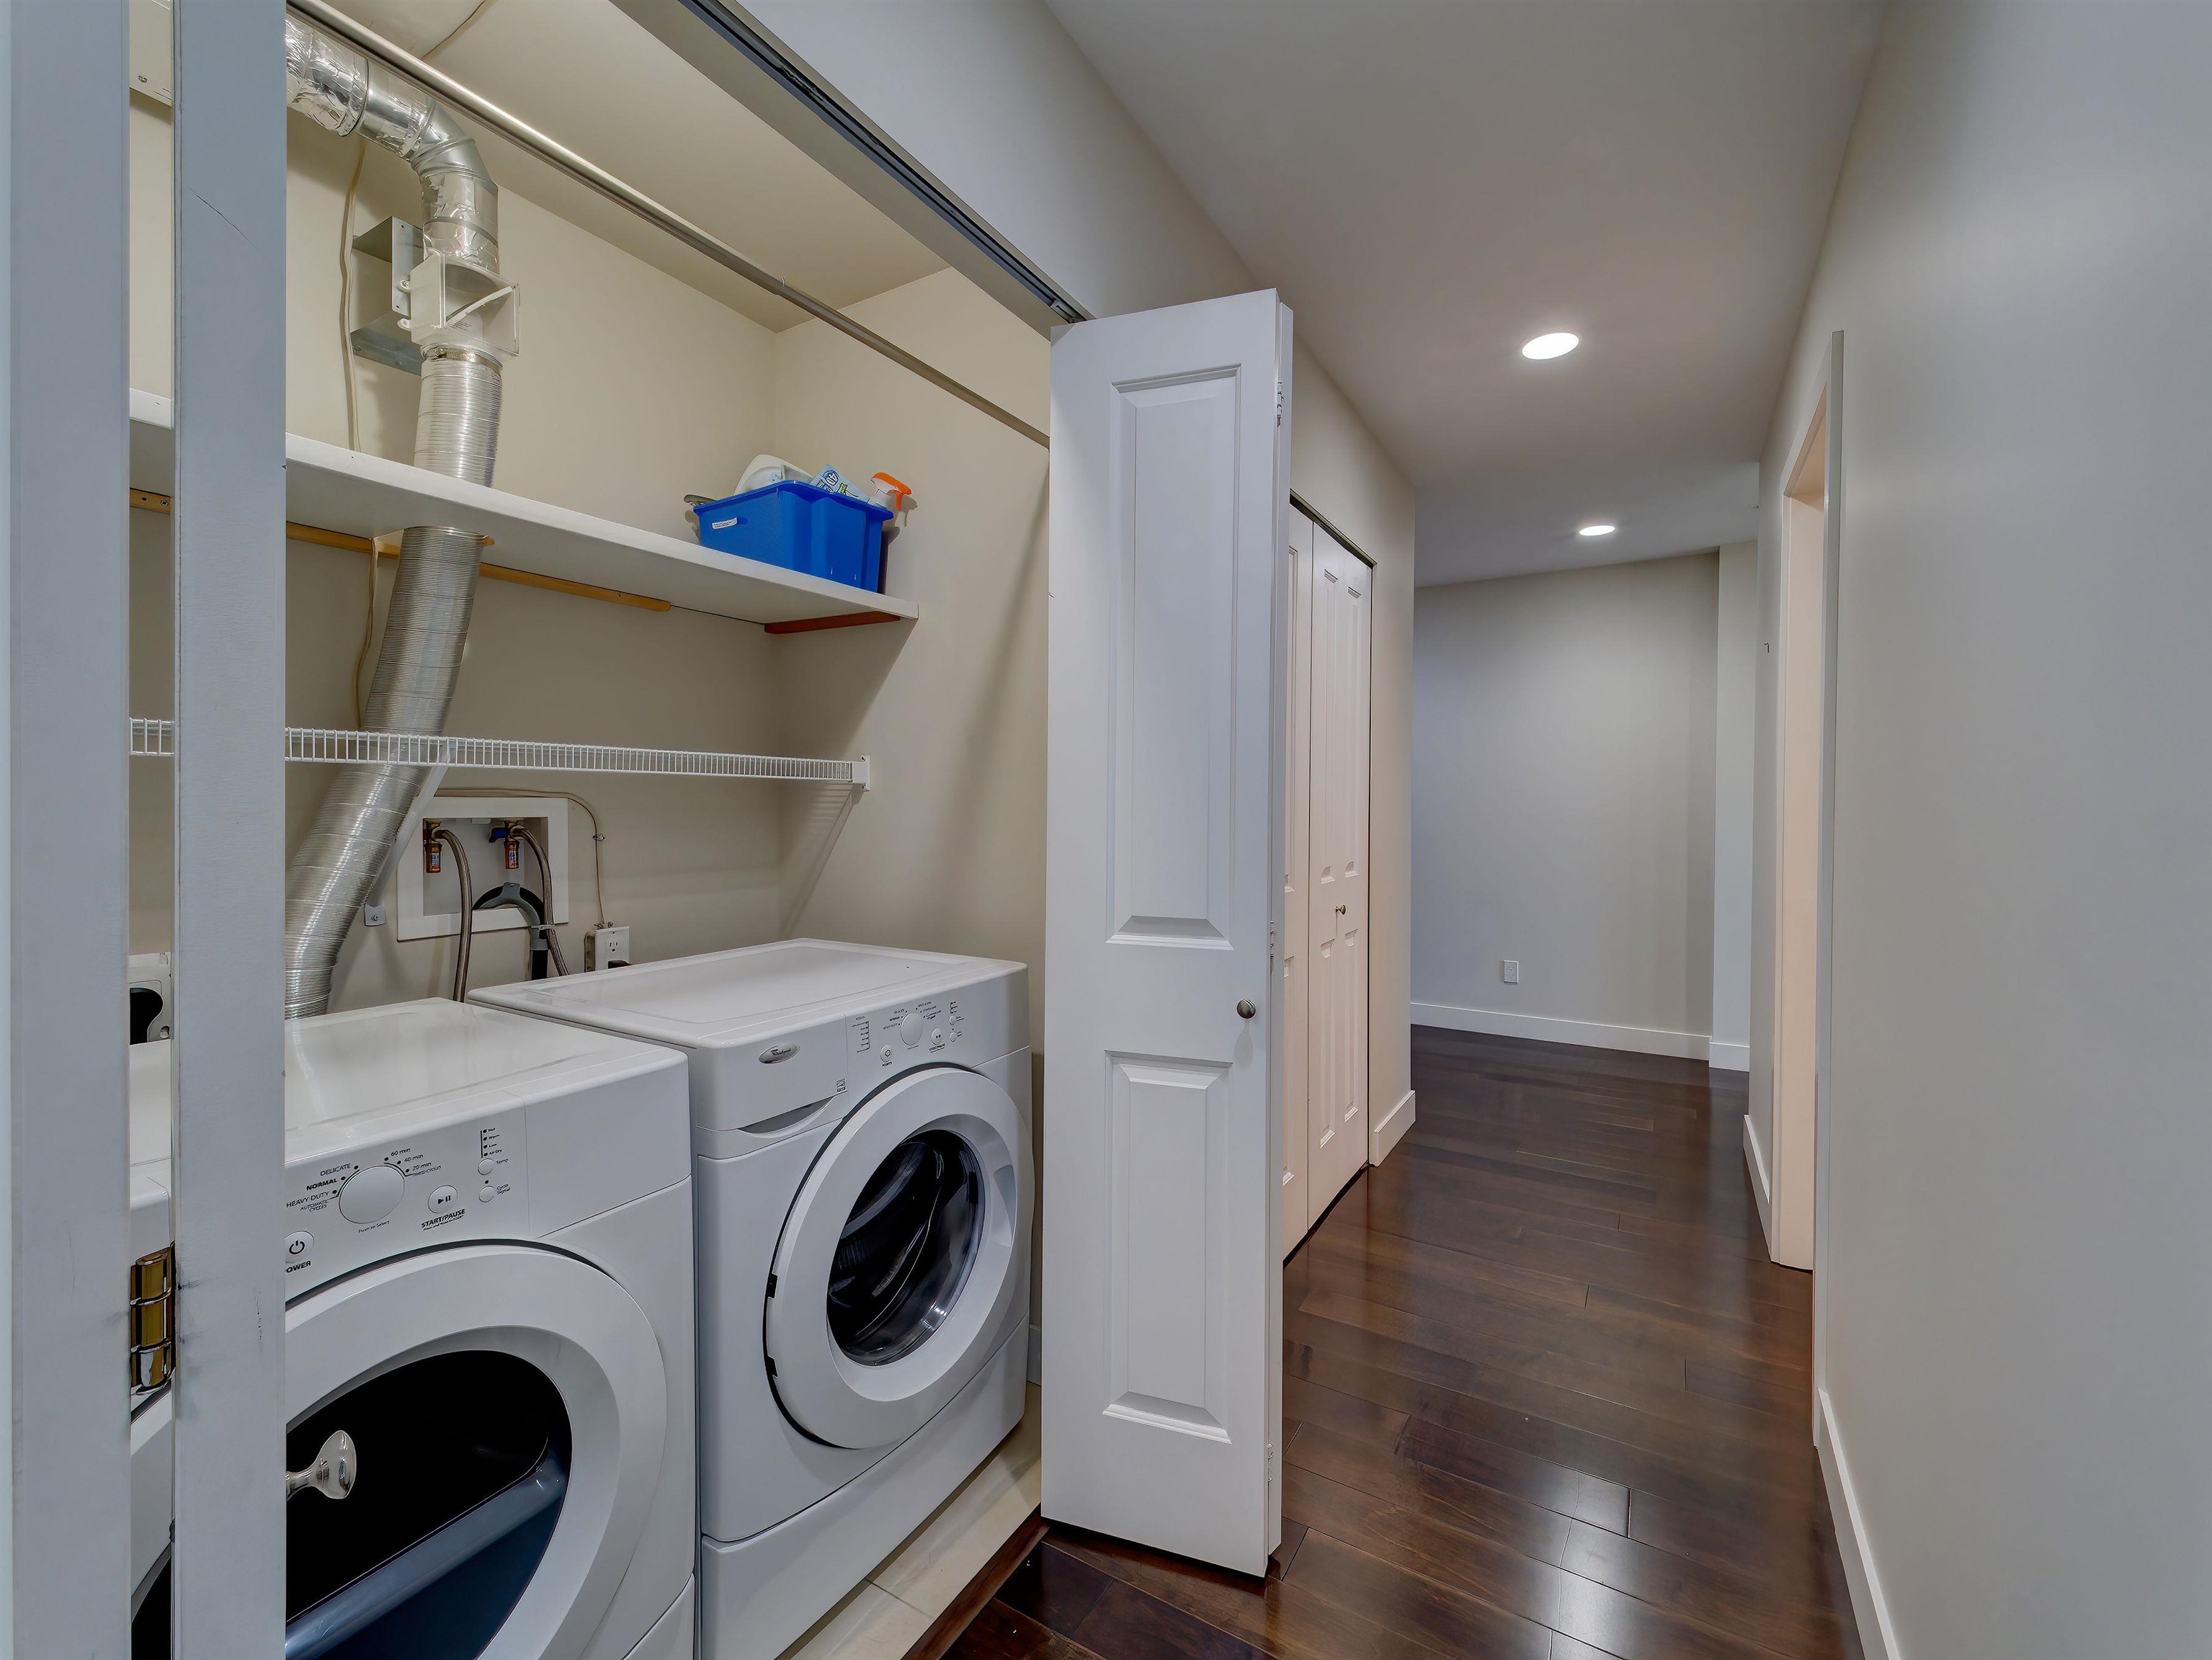 The laundry closet is located nicely away from the main living area and offers plenty of shelving and bi-fold doors.